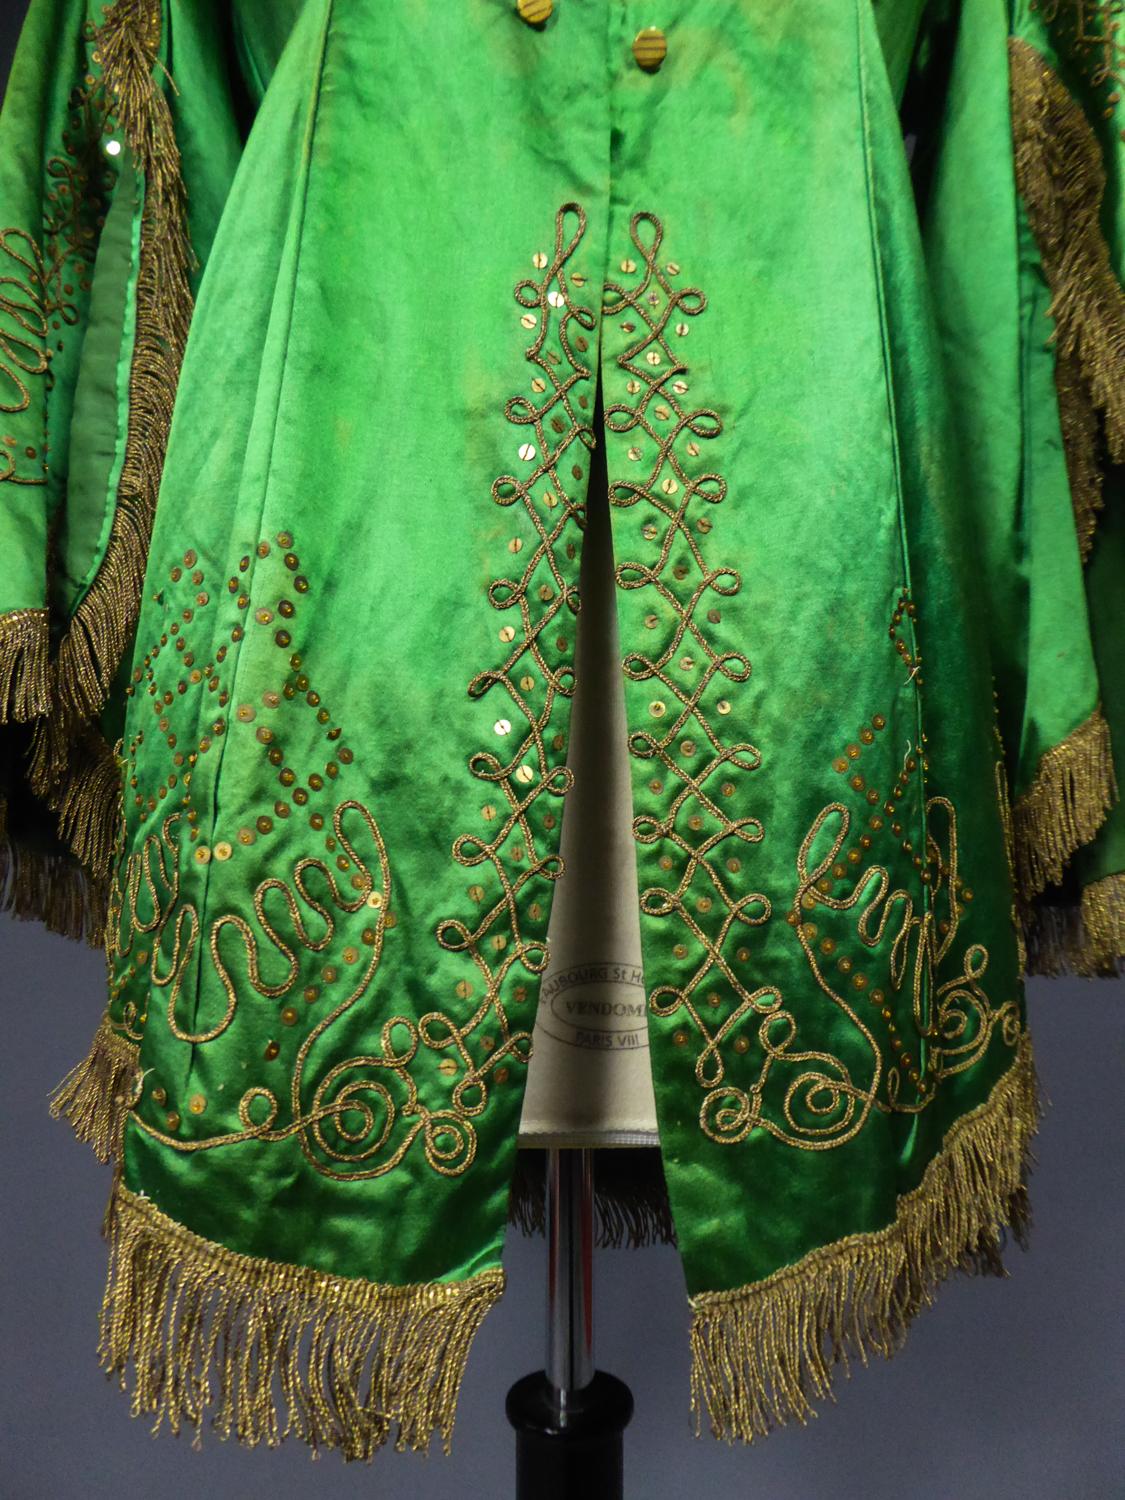 Circa 1940
France

Beautiful orientalist Fancy evening jacket or costume dating from the 1940s / 1950s. Yellow-green silk satin embroidered with golden sequins and appliqués of cords in golden threads. Fringes on the edge in trimmings of golden